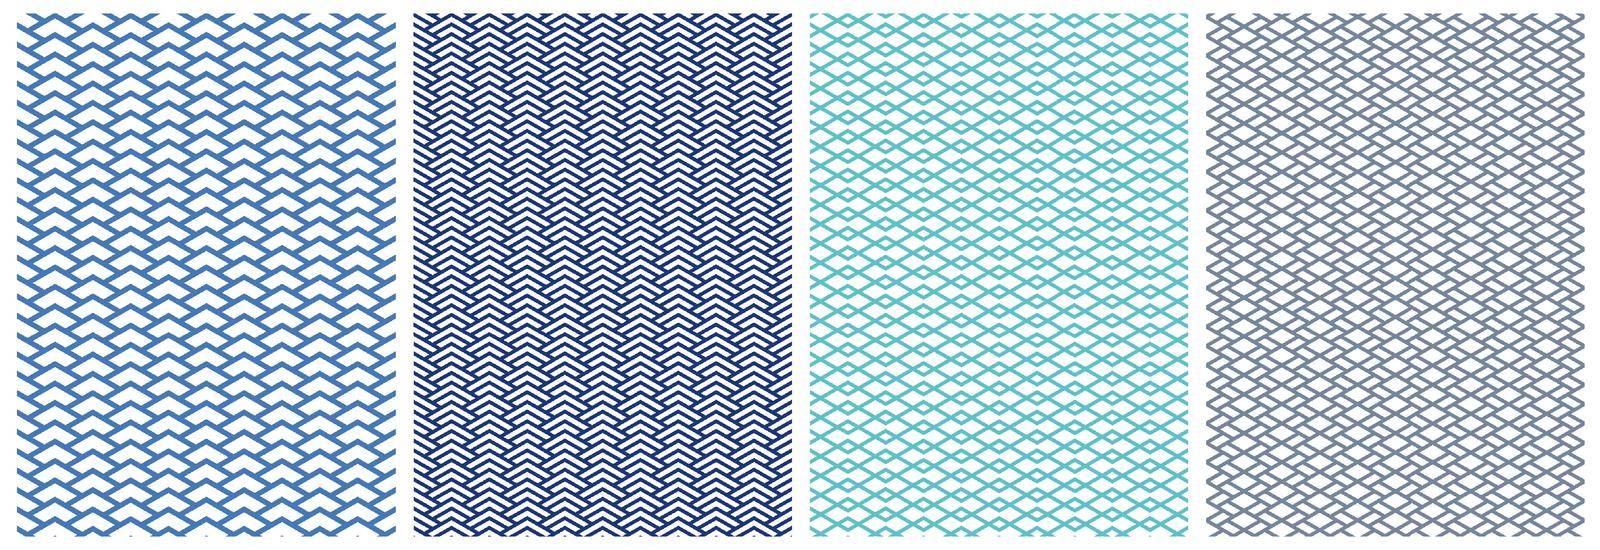 Geometry seamless line grid pattern on white background. Simple geometric motive for cloth, wrapping paper, cover design. Vector illustration